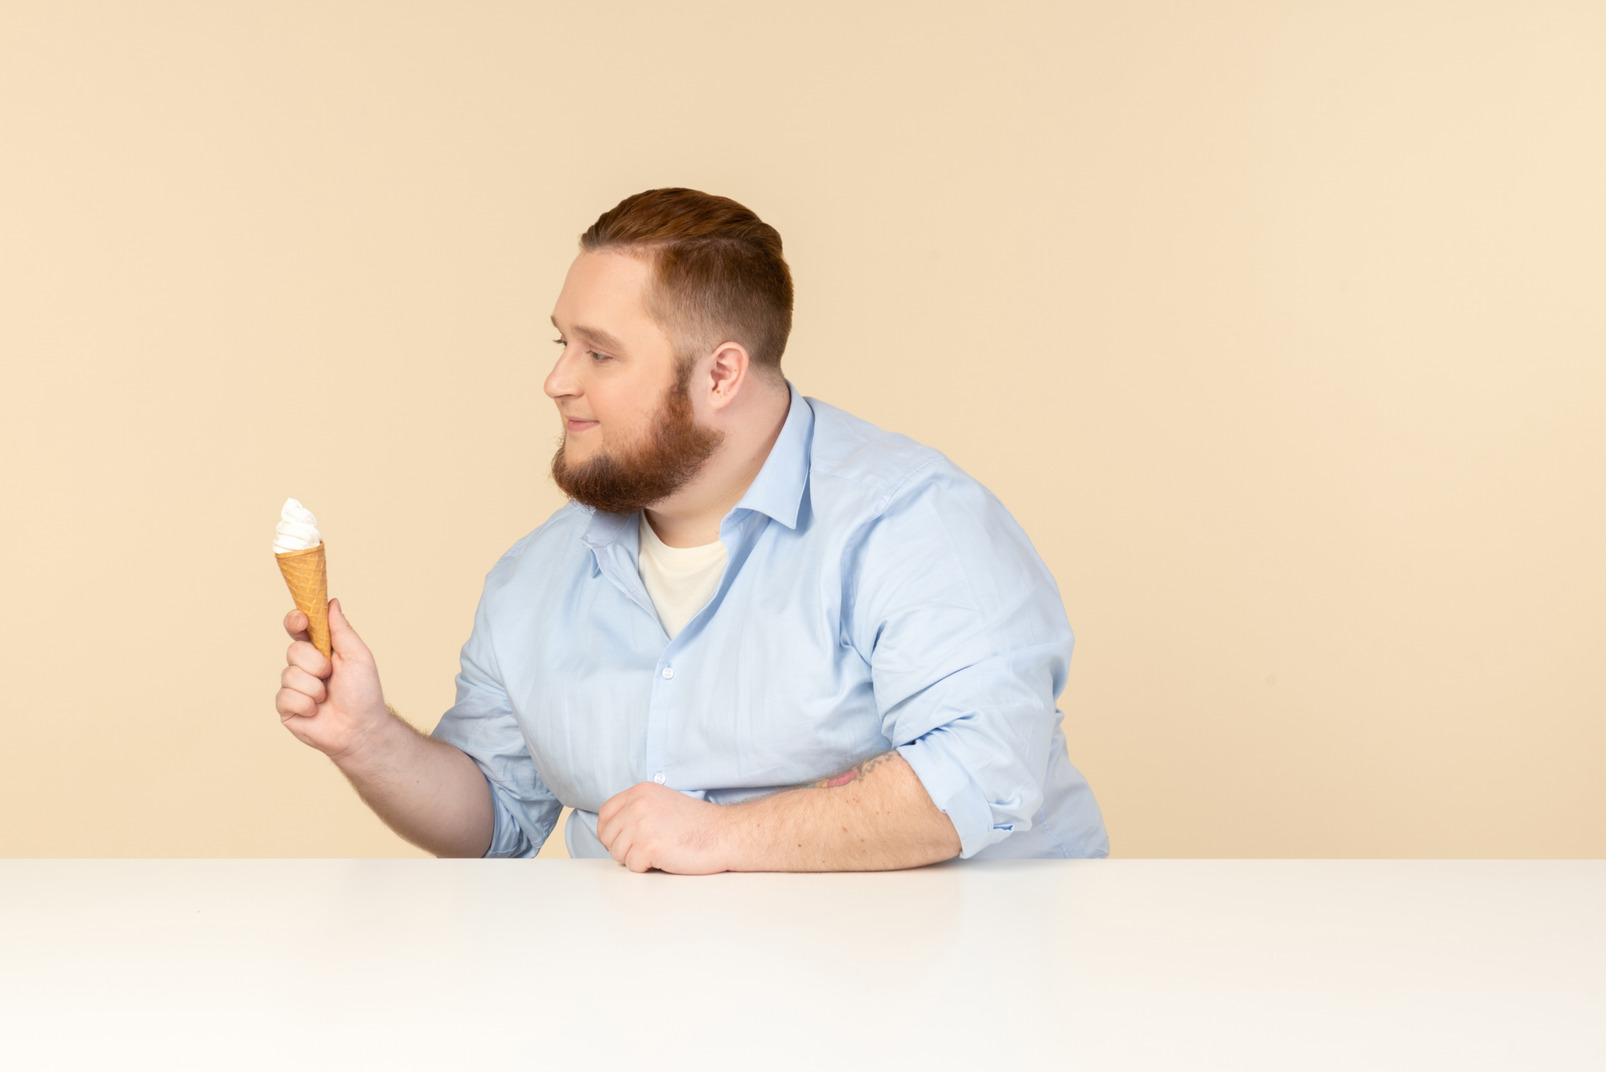 Big man sitting at the table and holding ice cream